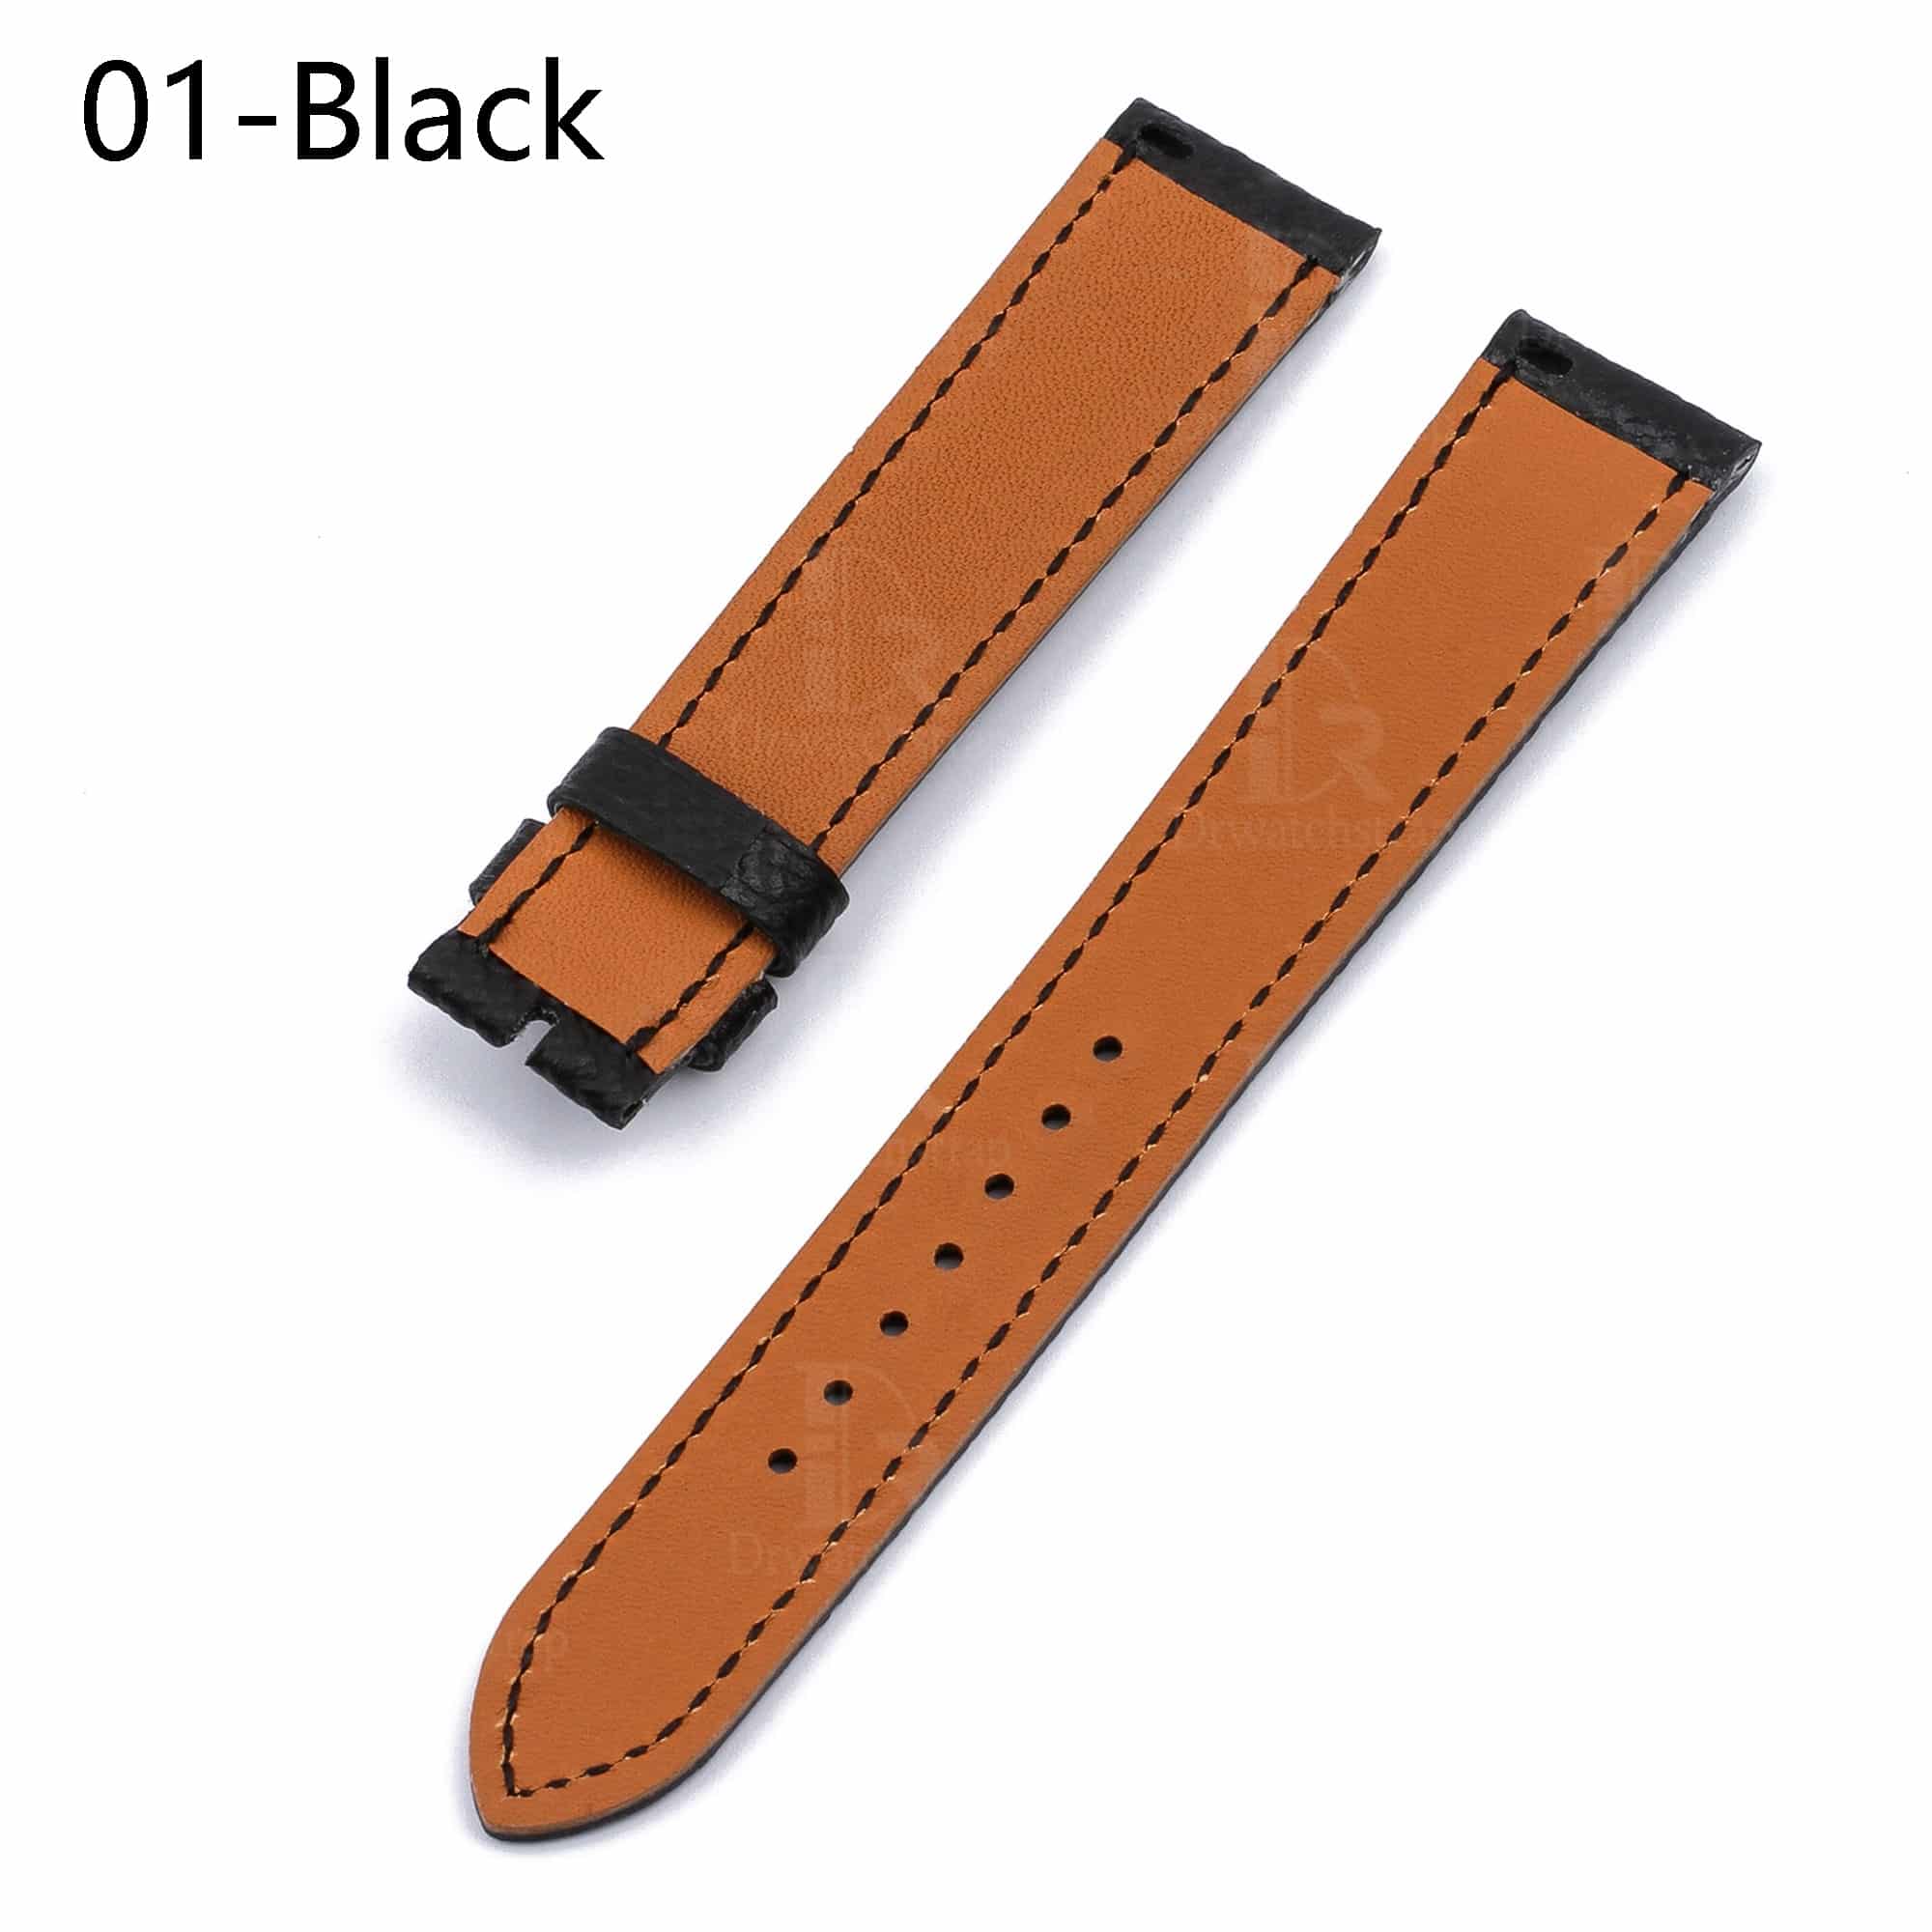 Handmade OEM Hermes watch band replacement